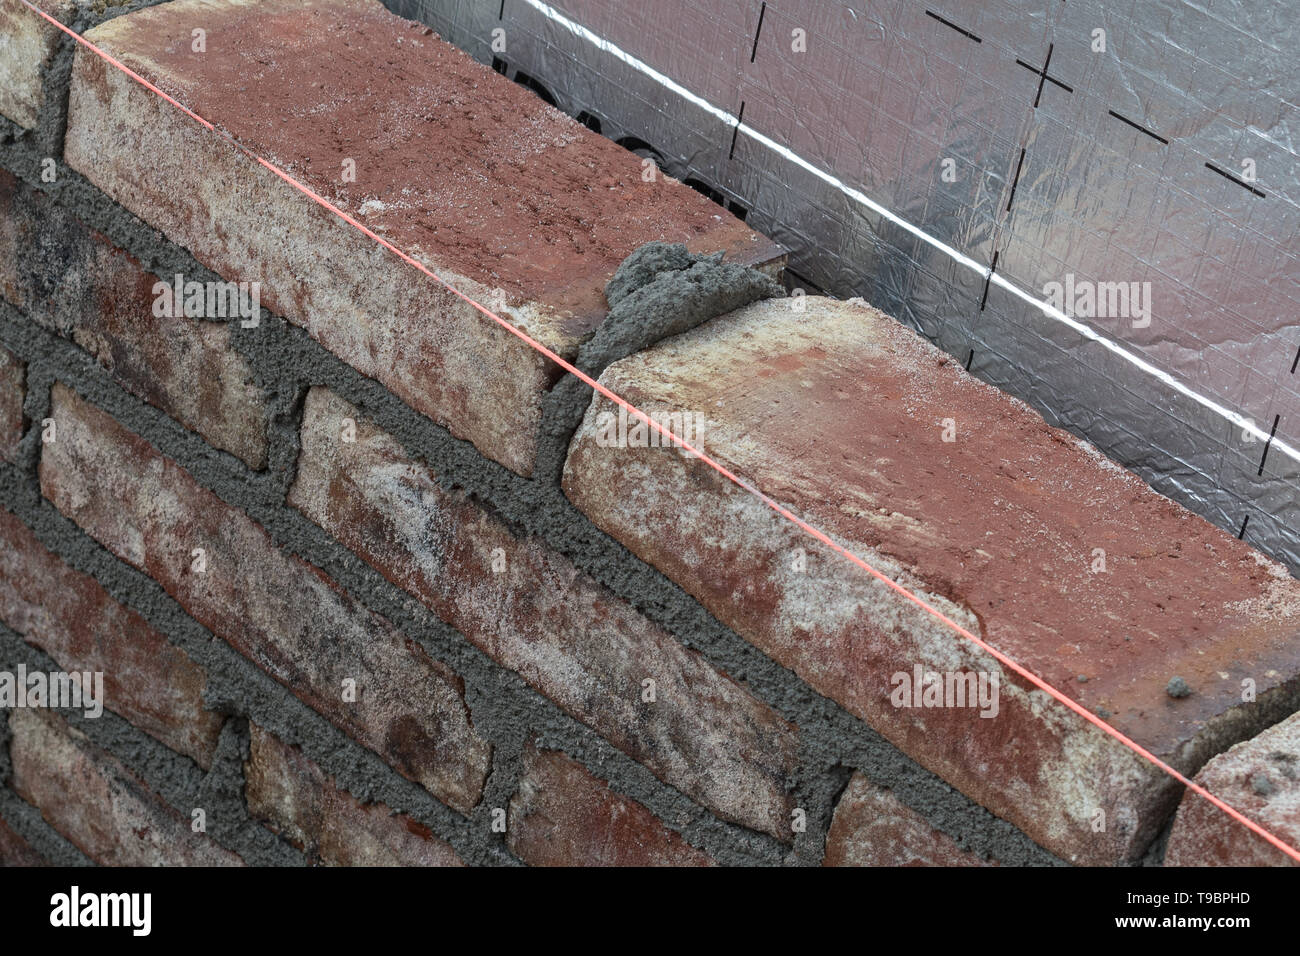 brown bricks building with silver colored isolation material behind the bricks Stock Photo